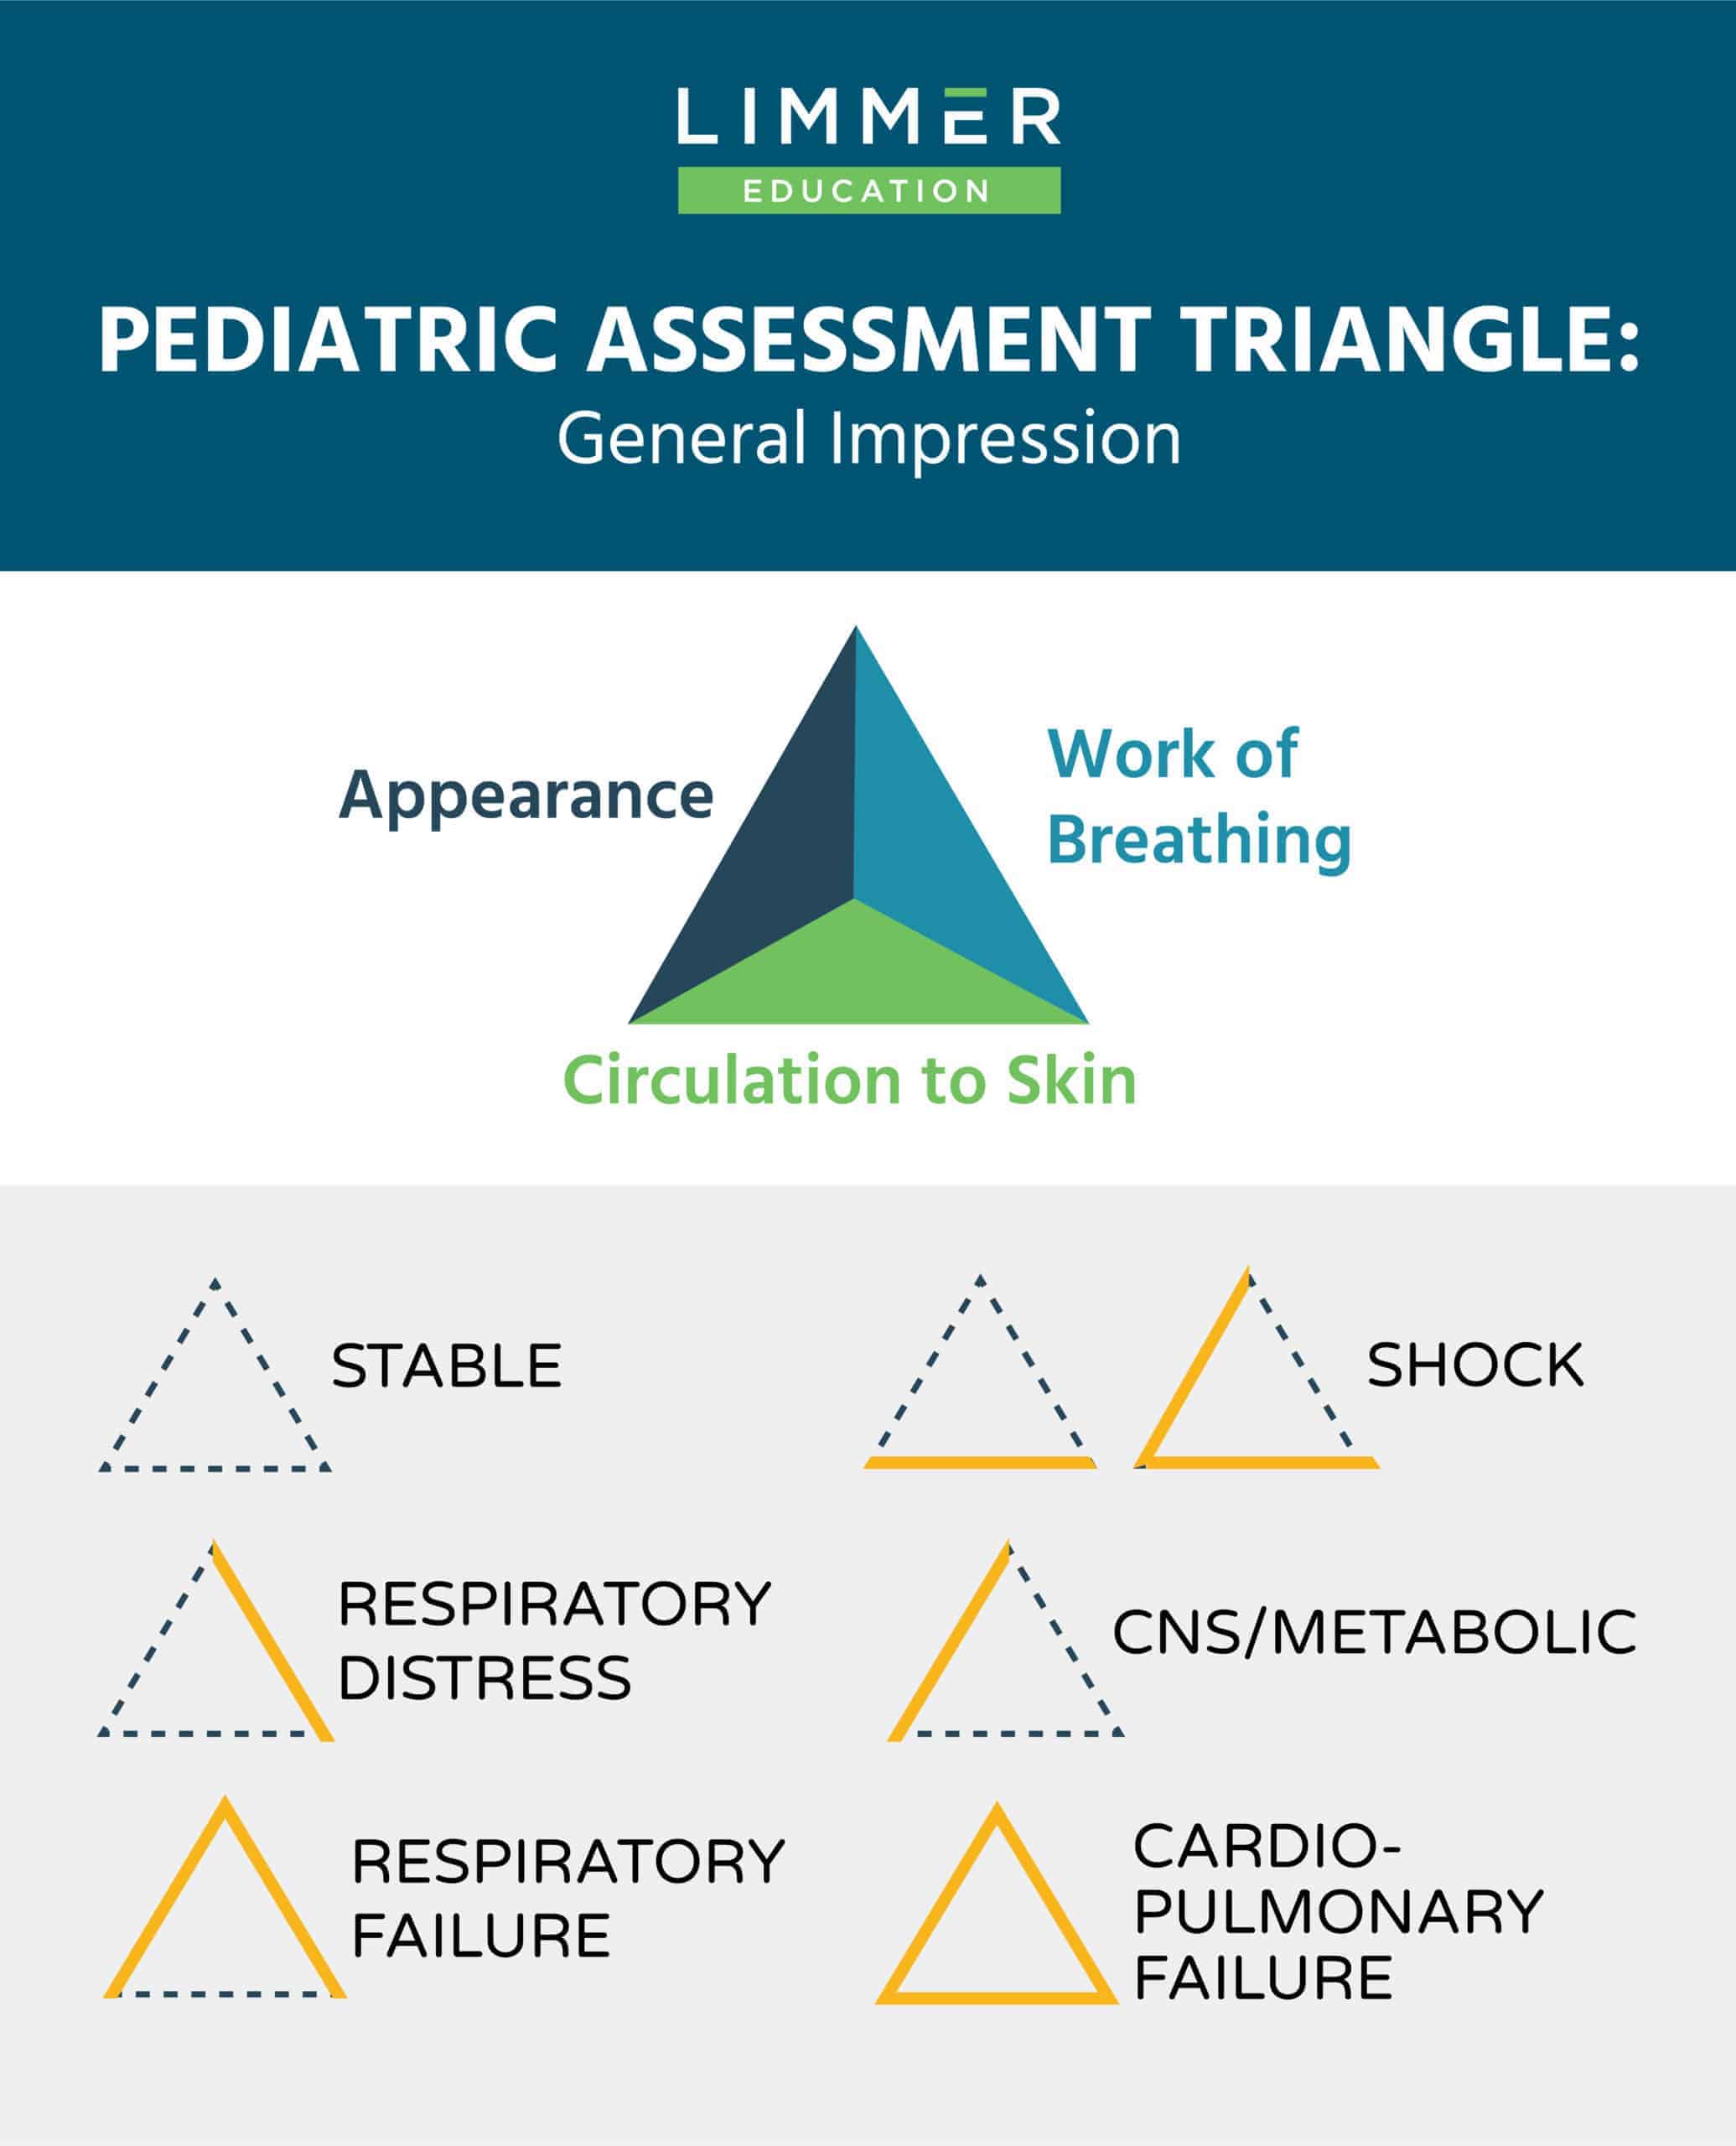 pediatric assessment triangle for developing general impression of pediatric patients' stability